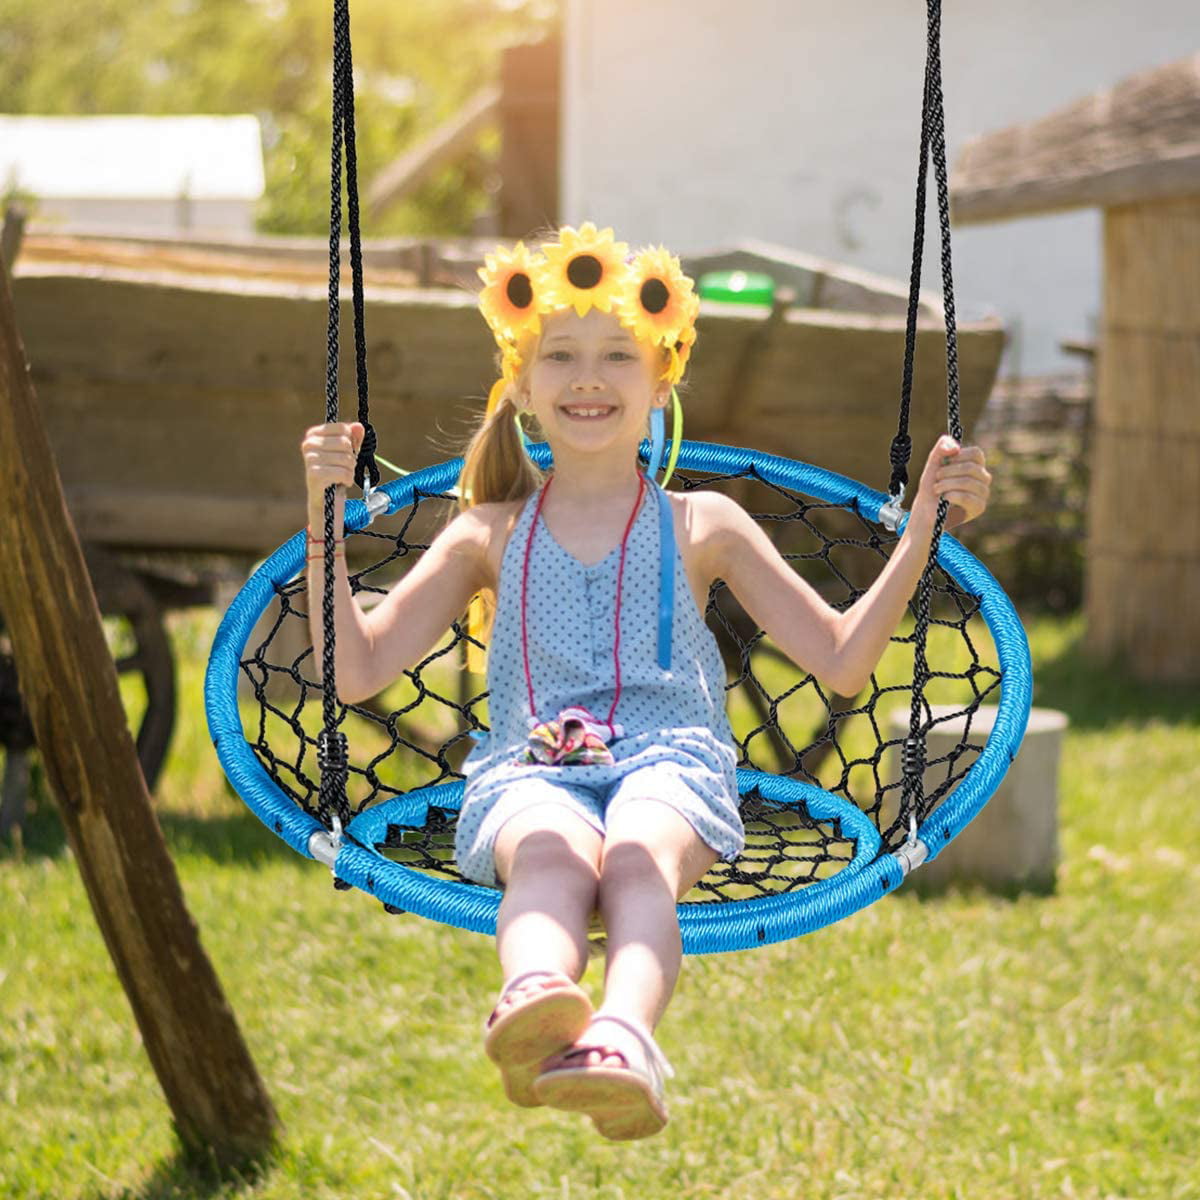 KIDS GARDEN PLASTIC BABY BACKREST SWING SEAT WITH ROPES CLIMBING FRAME PLAYHOUSE 